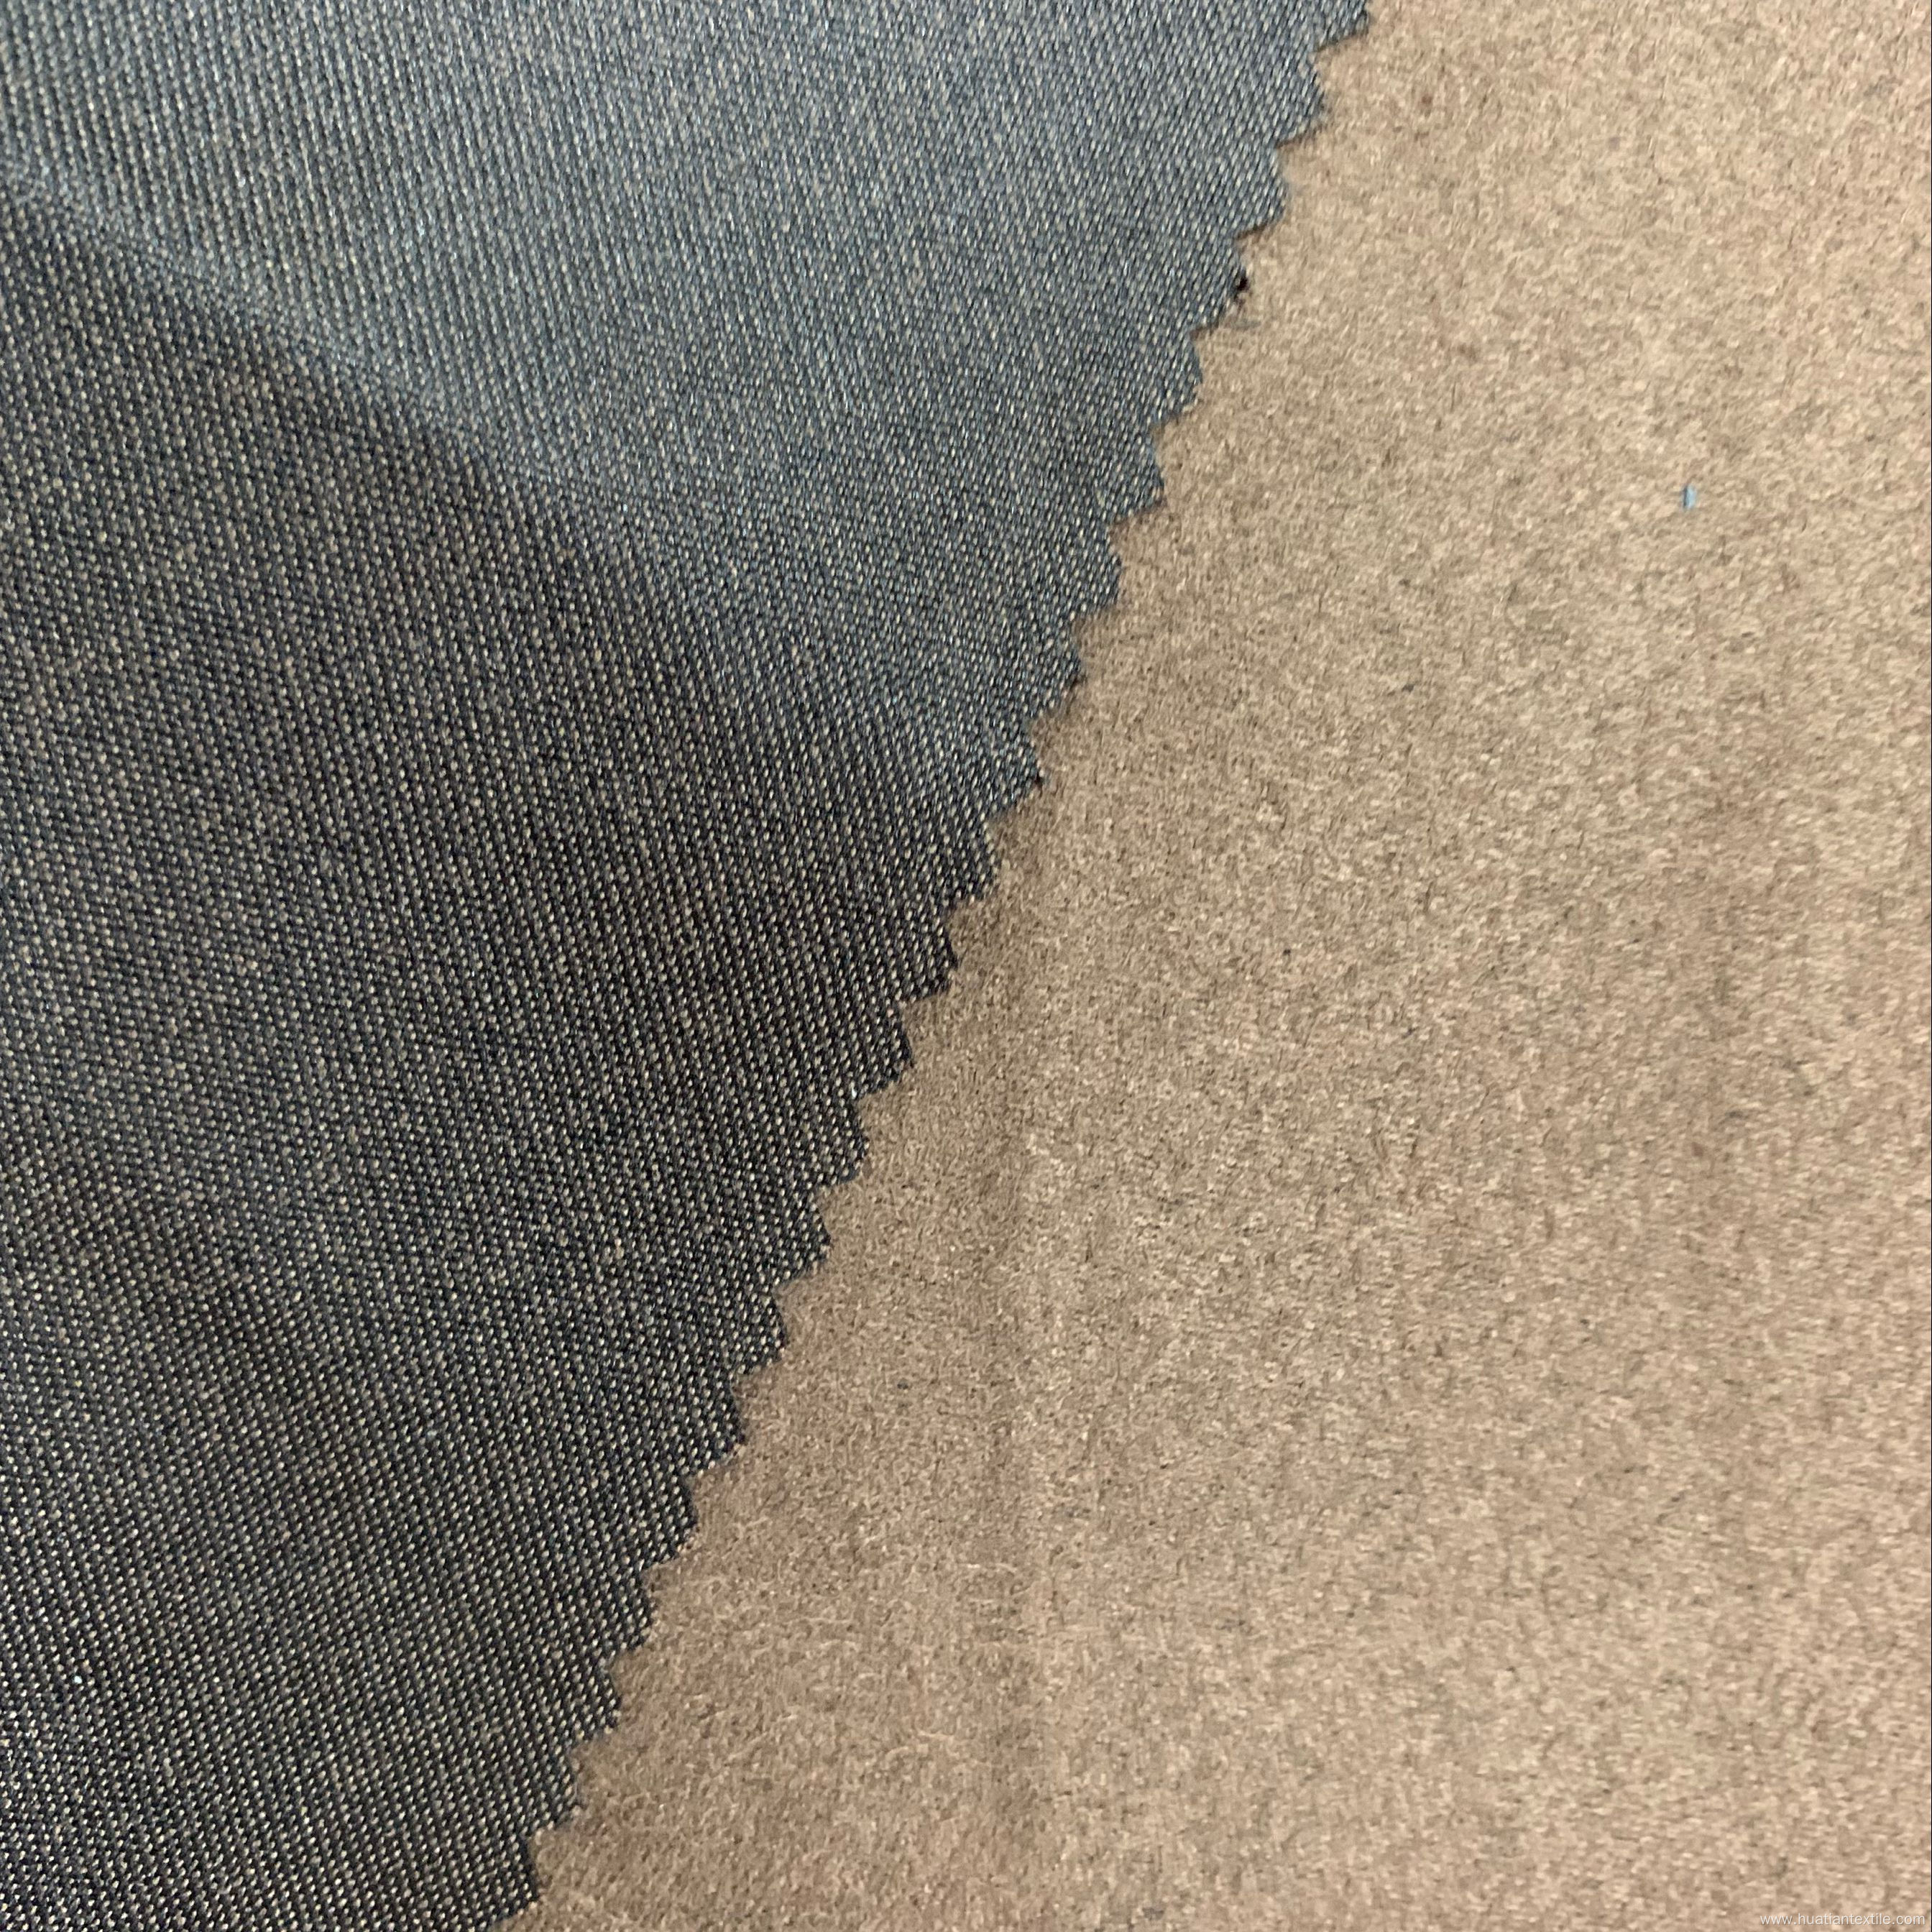 100% polyester warp woven suede fabric